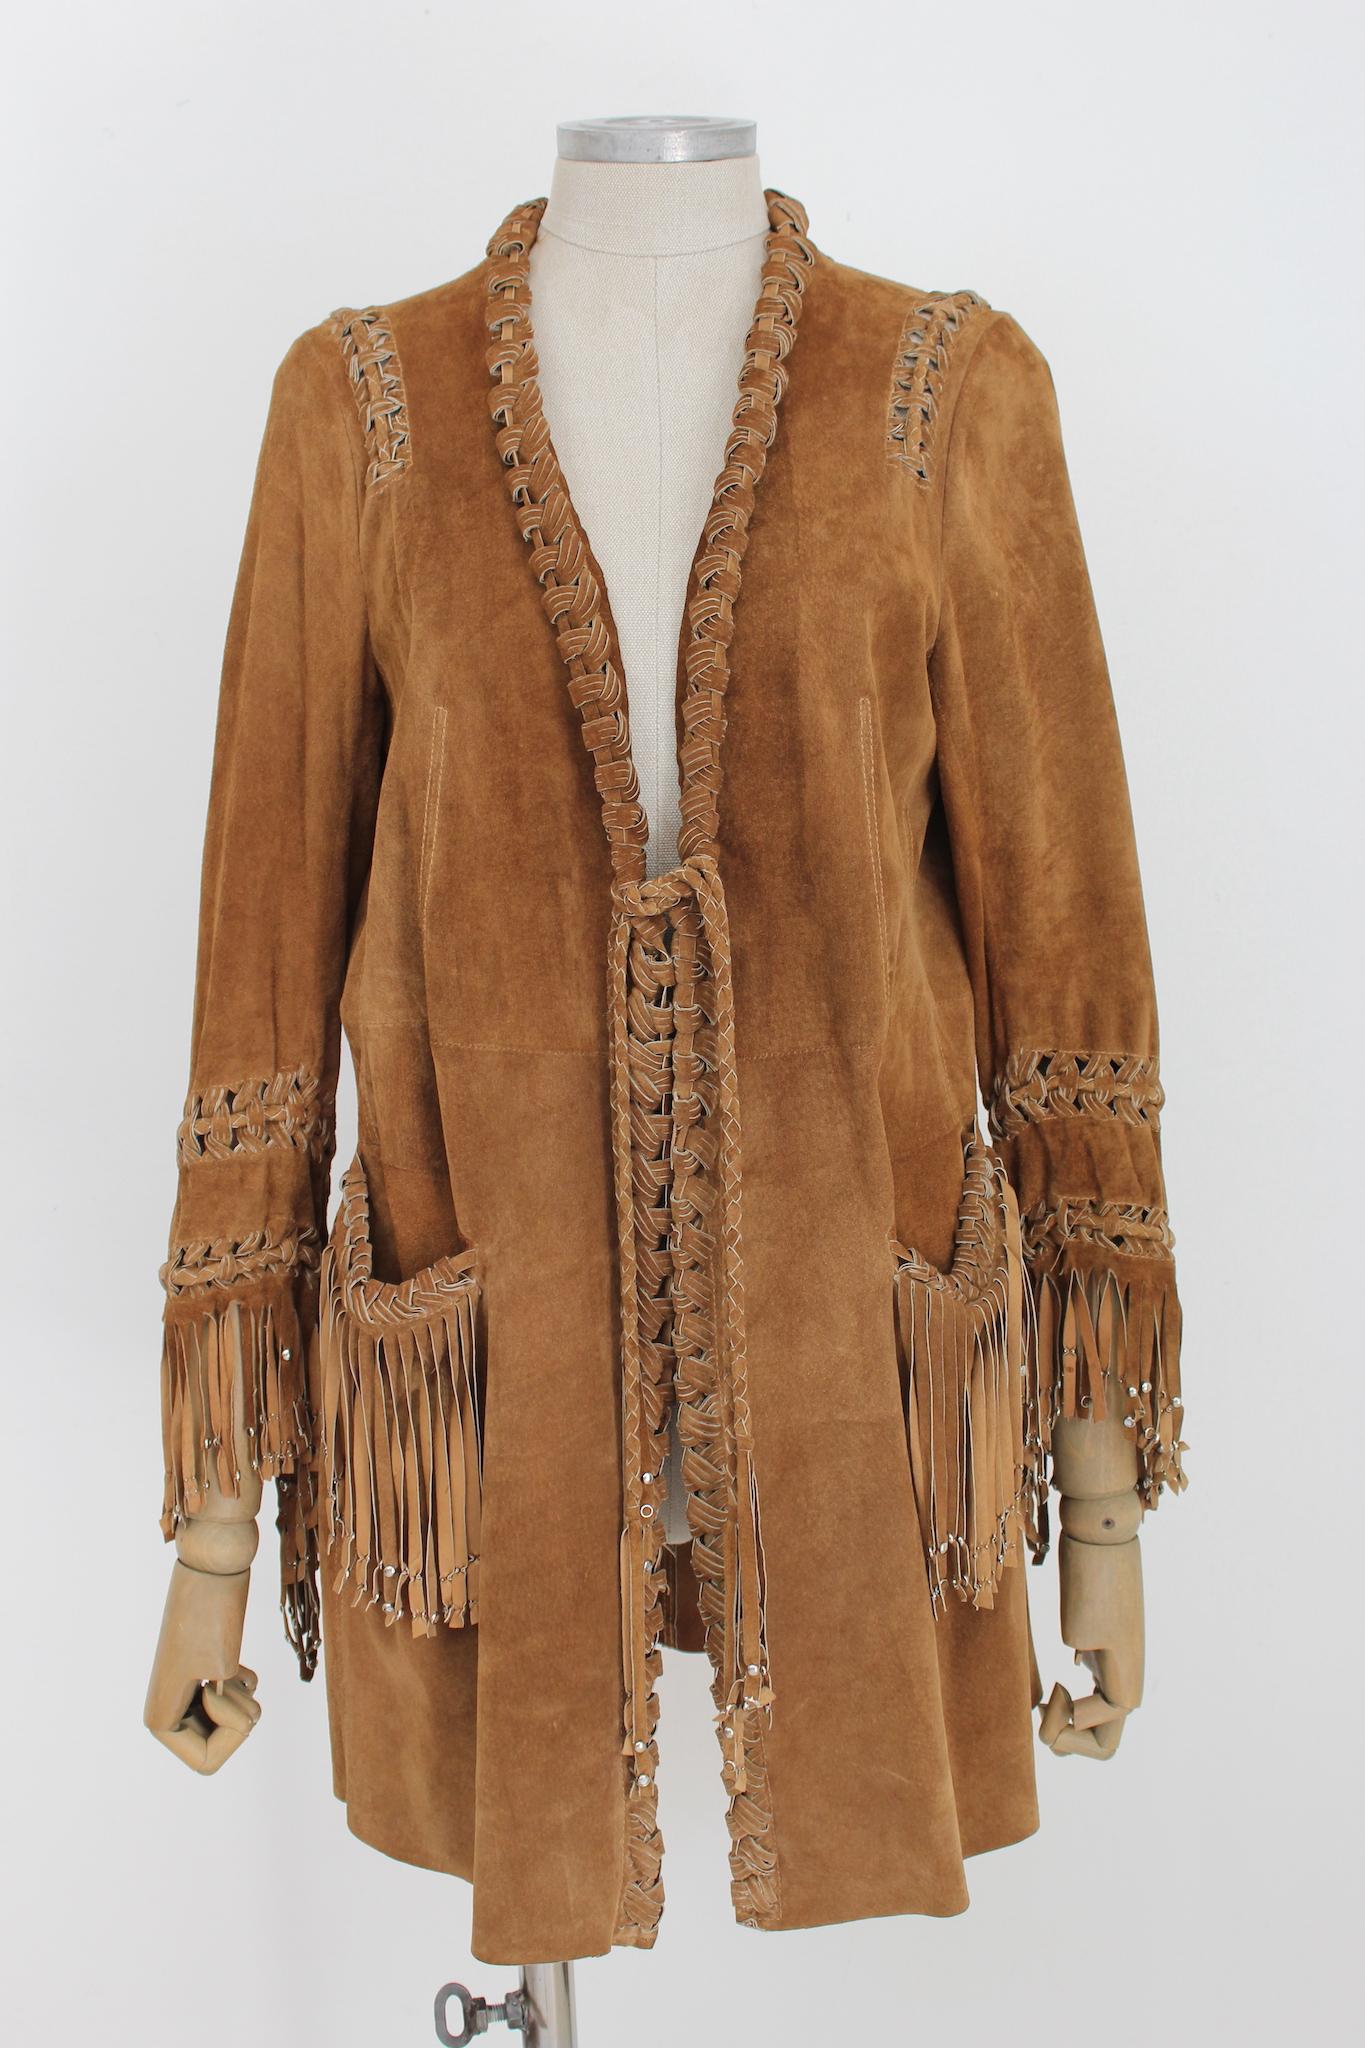 Sylvie Schimmel vintage 90s jacket in leather and fringes. Wide jacket in soft light brown leather, braided leather trims and fringes along the edges with small silver-colored studs. Closure with adjustable laces at the waist.

Size: 44 It 10 Us 12